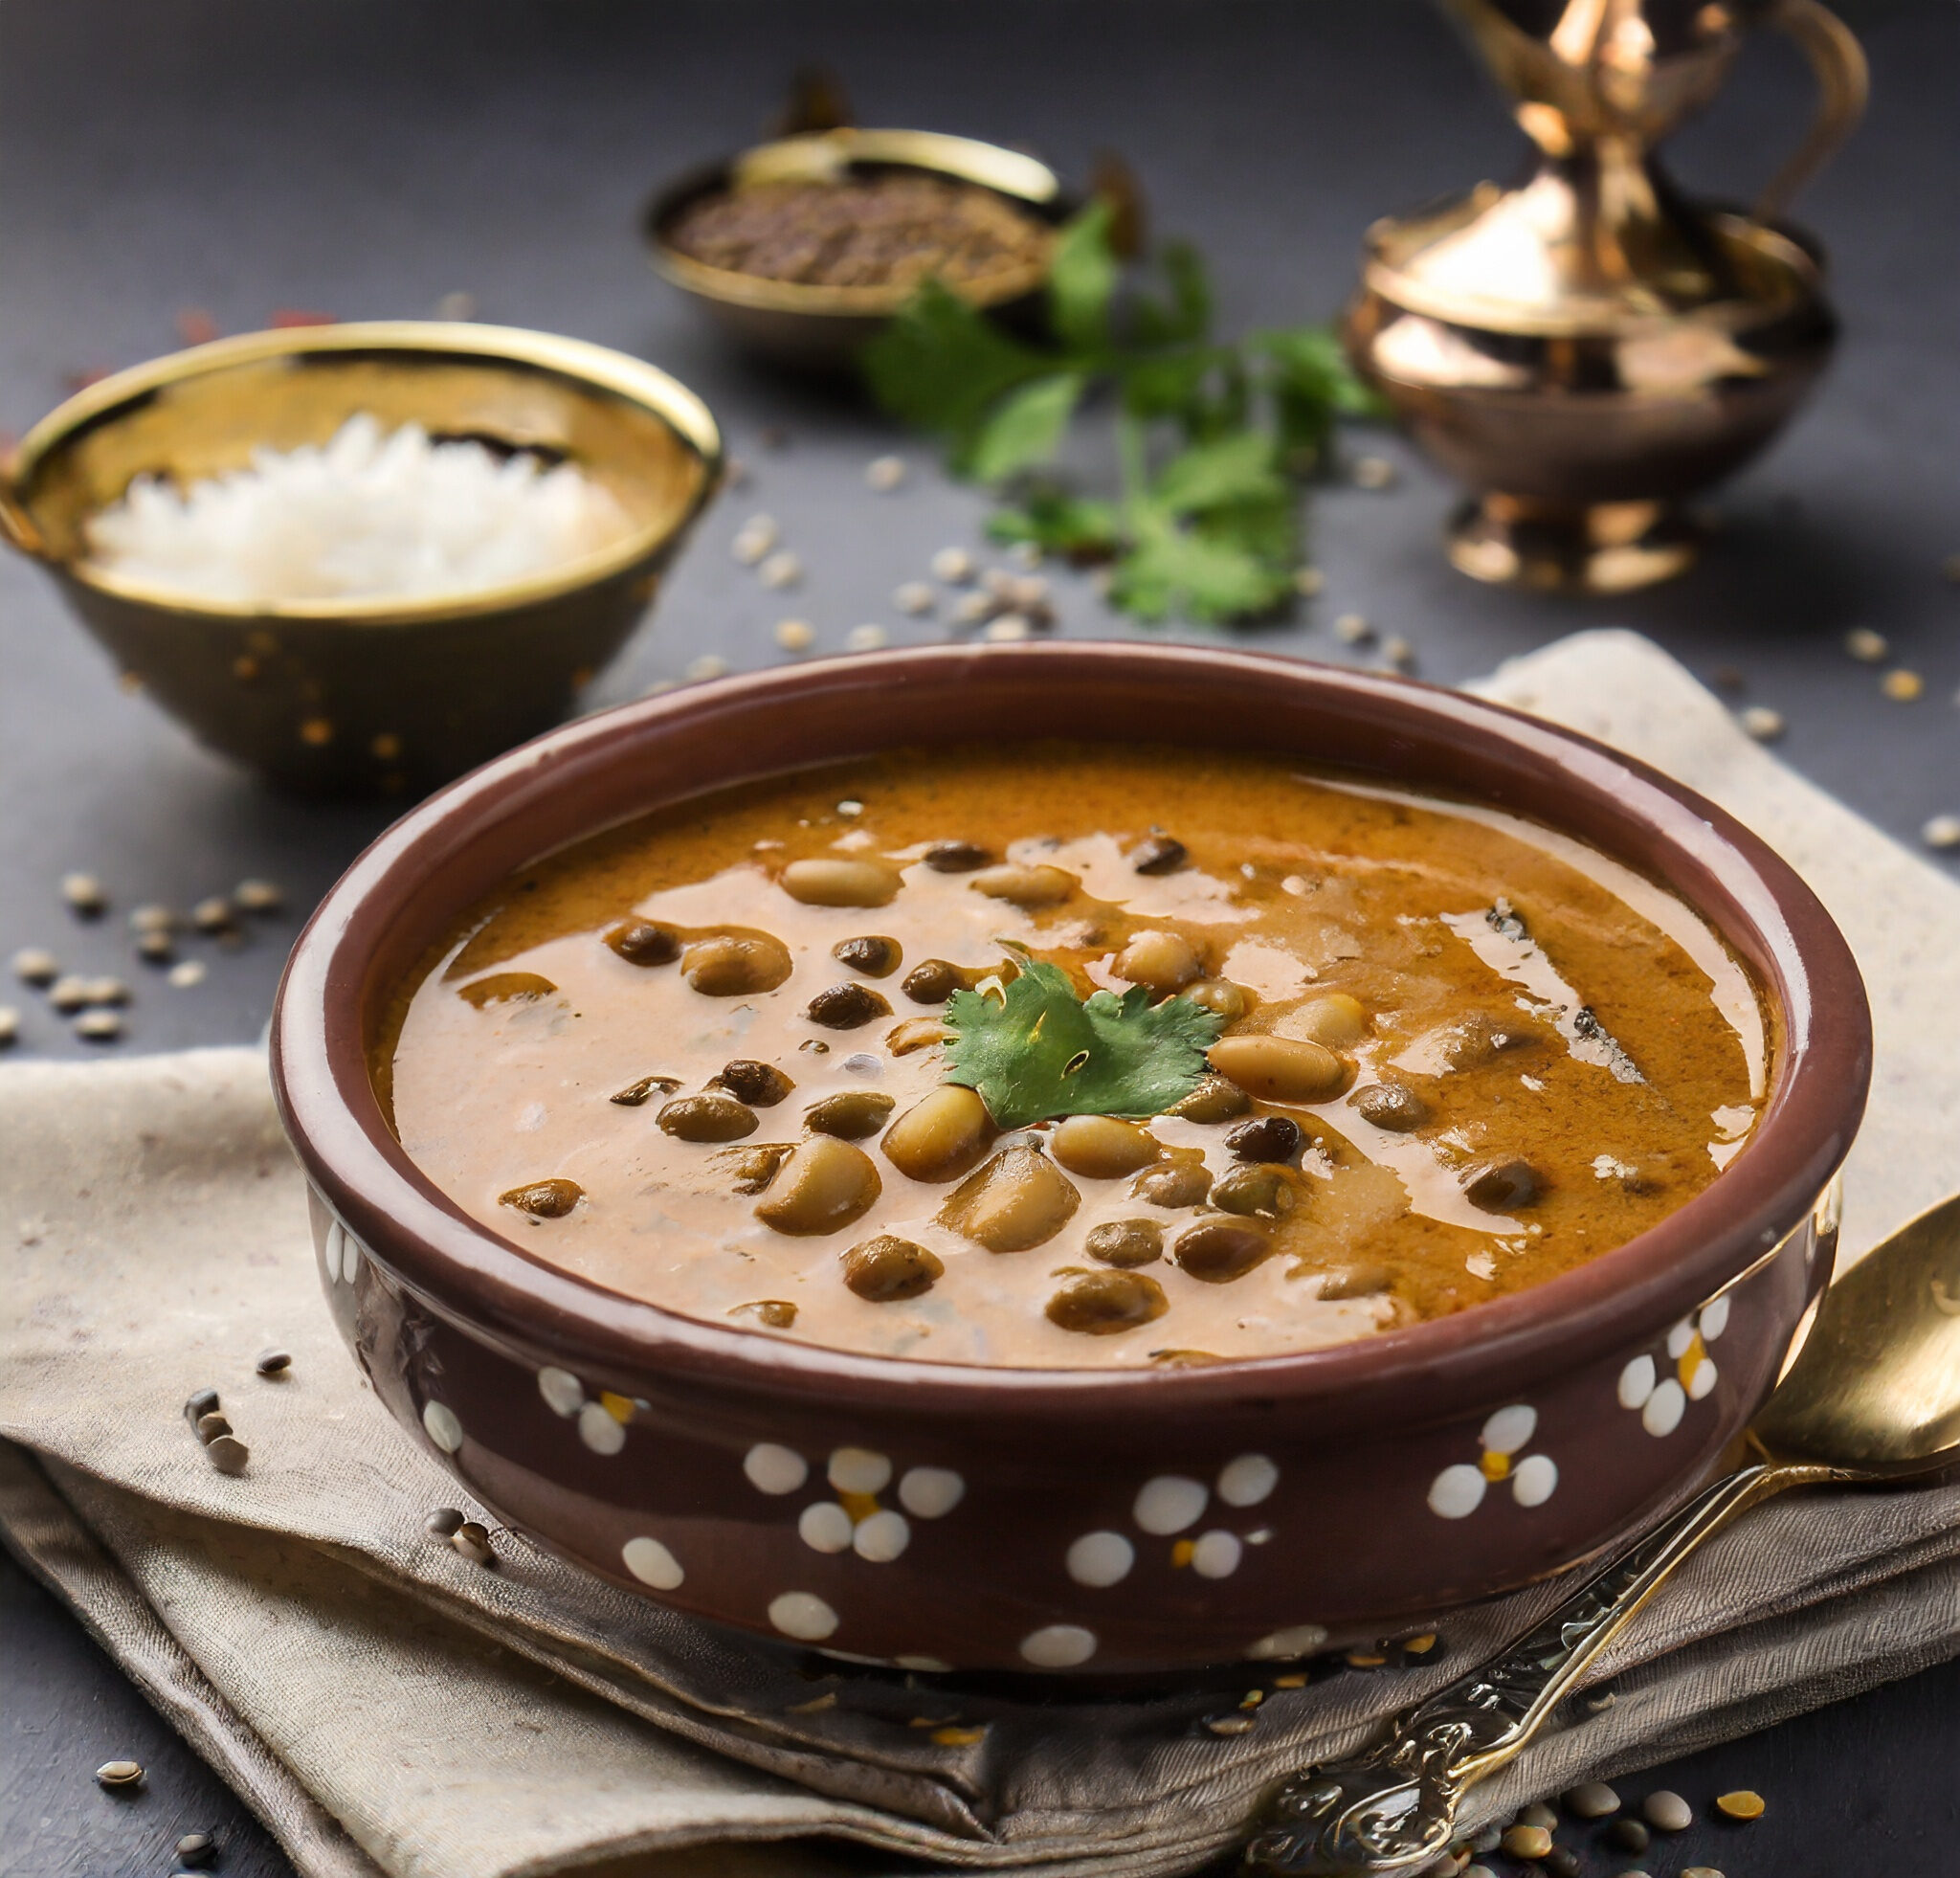 Dal Makhani Recipe and Variations | Cook Creamy, Rich, and Satisfying Indian Dish at Home 